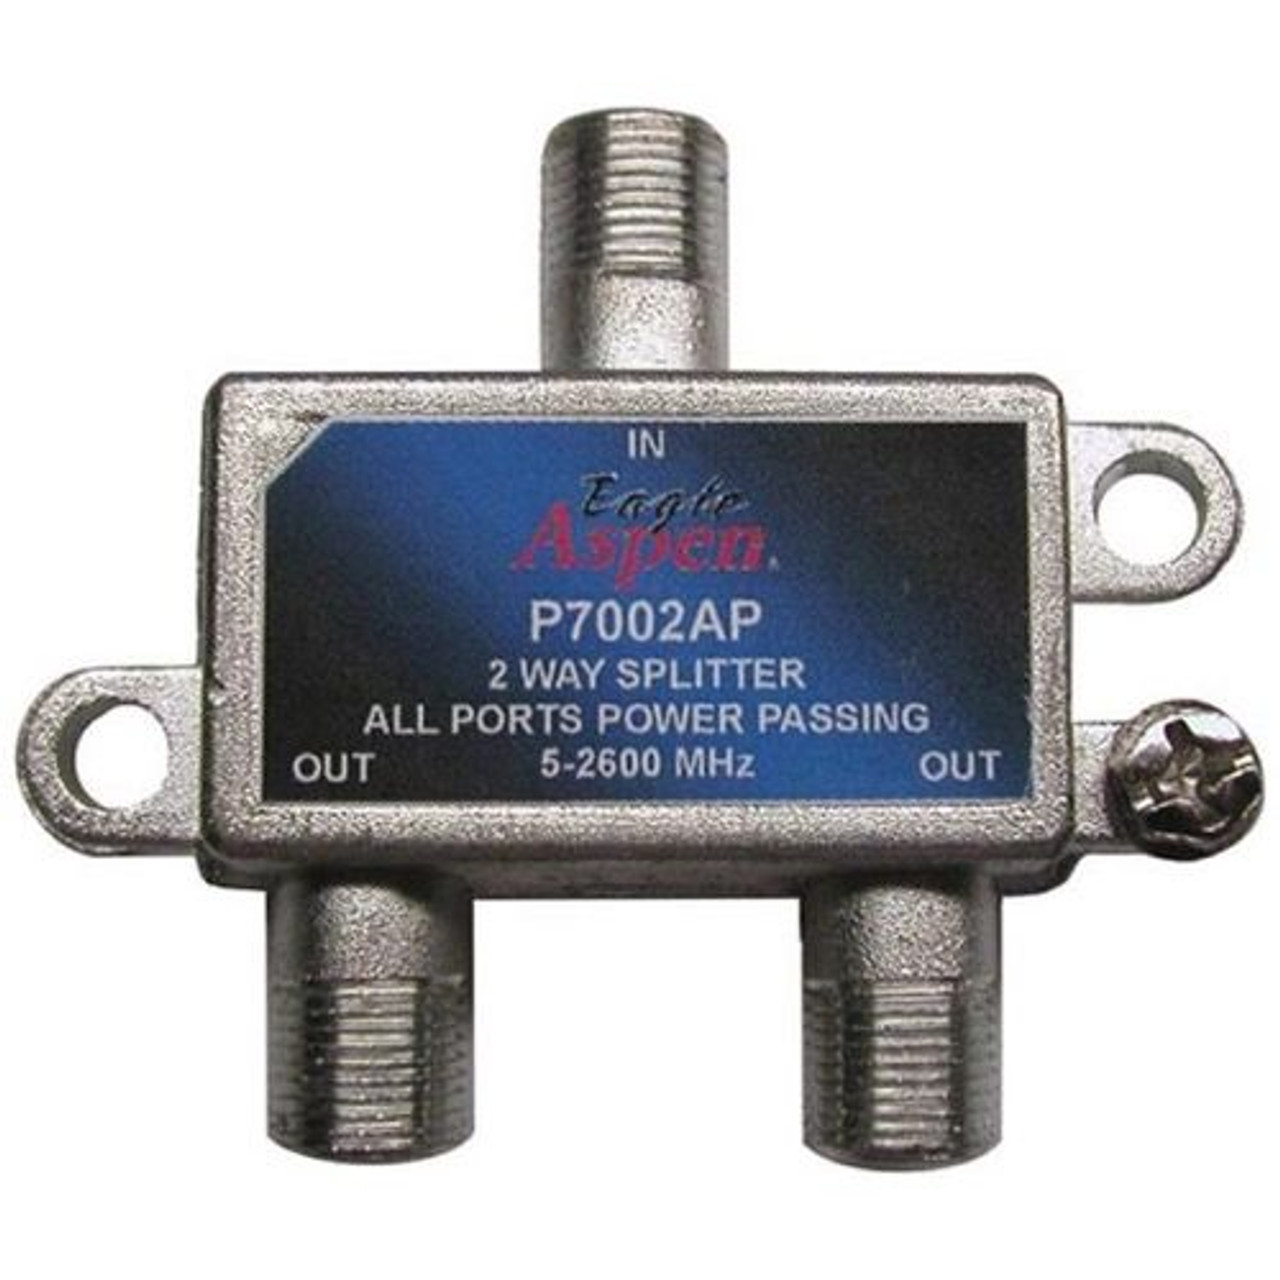 Eagle Aspen 500309 2 Way Splitter 2600 MHz All Port Passing  2600 MHz Splitter All Port Voltage DC Power Passing Low and High Frequency Off-Air Signal UHF/VHF CATV Video Splitter, Part # P-7002A